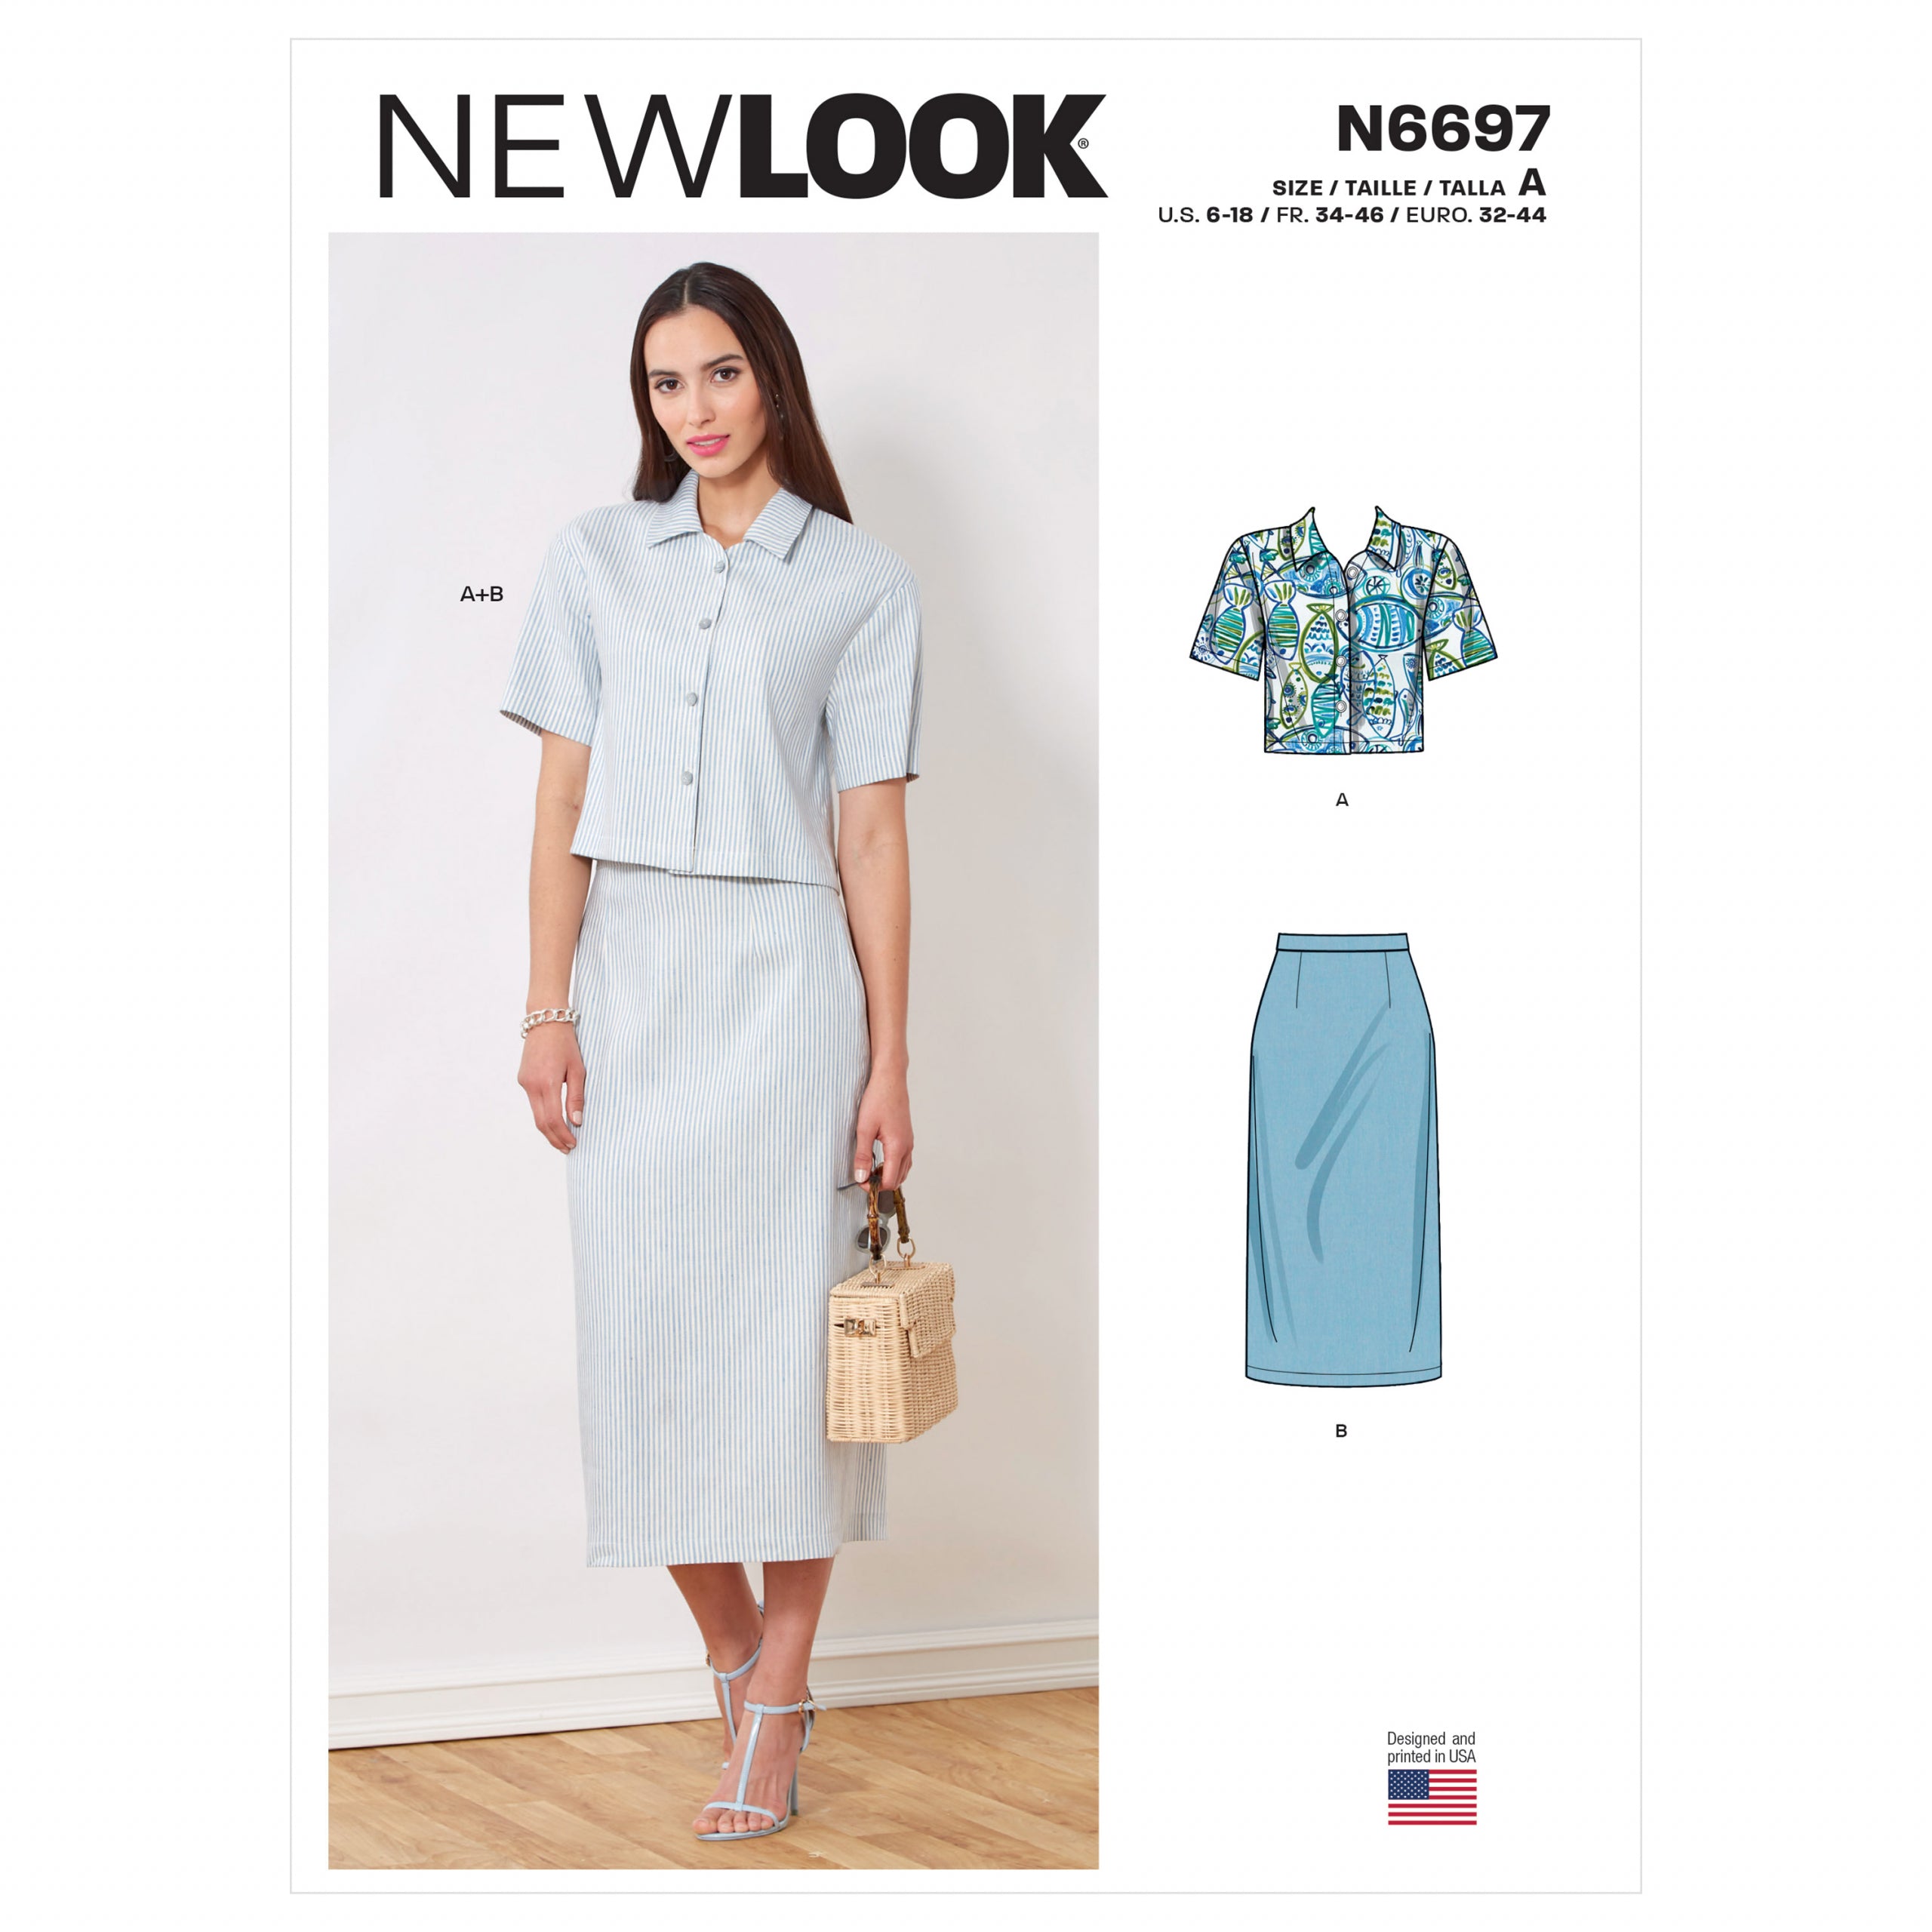 New Look Top and Skirt N6697